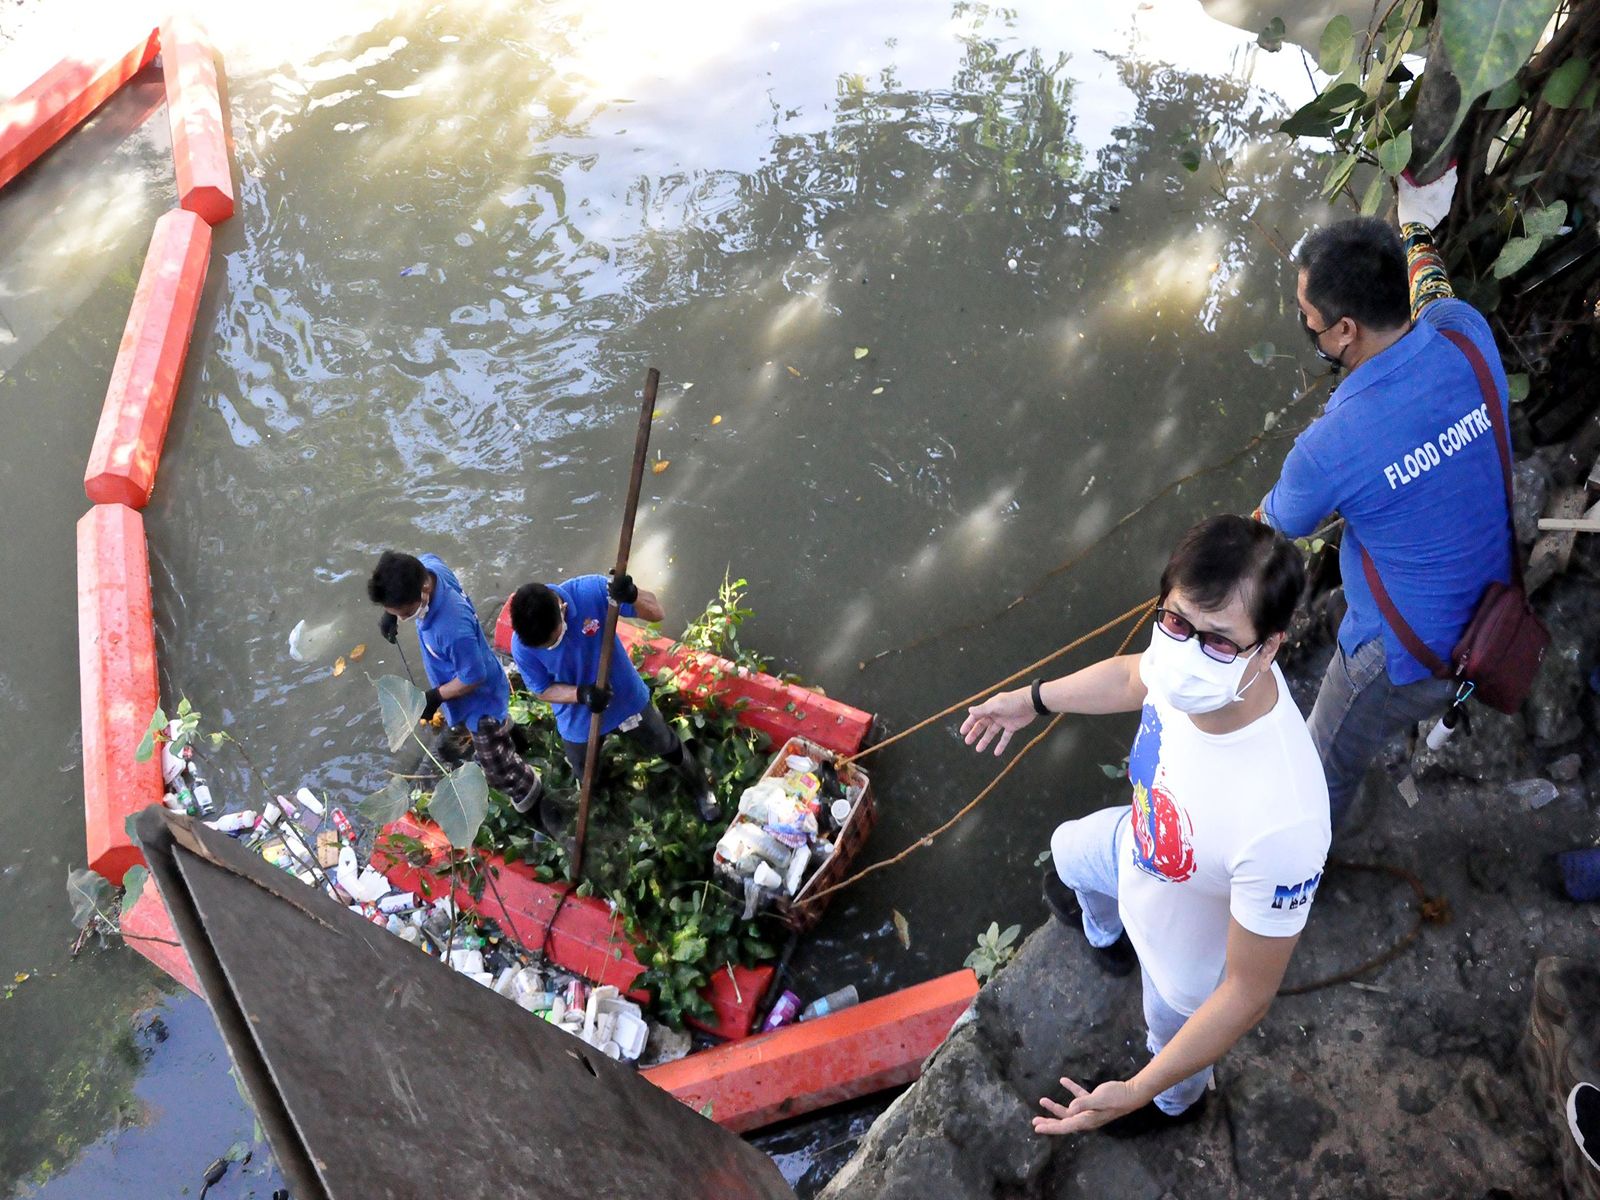 FLOOD MANAGEMENT MEASURE. Chairman Benhur Abalos inspects newly installed trash traps at Lagarian Creek in E Rodriguez, Quezon City on Wednesday, 3 November 2021. The trash traps were designed to help mitigate damage to the pumping stations caused by huge garbage brought by floods during heavy rains.(DANNY QUERUBIN)